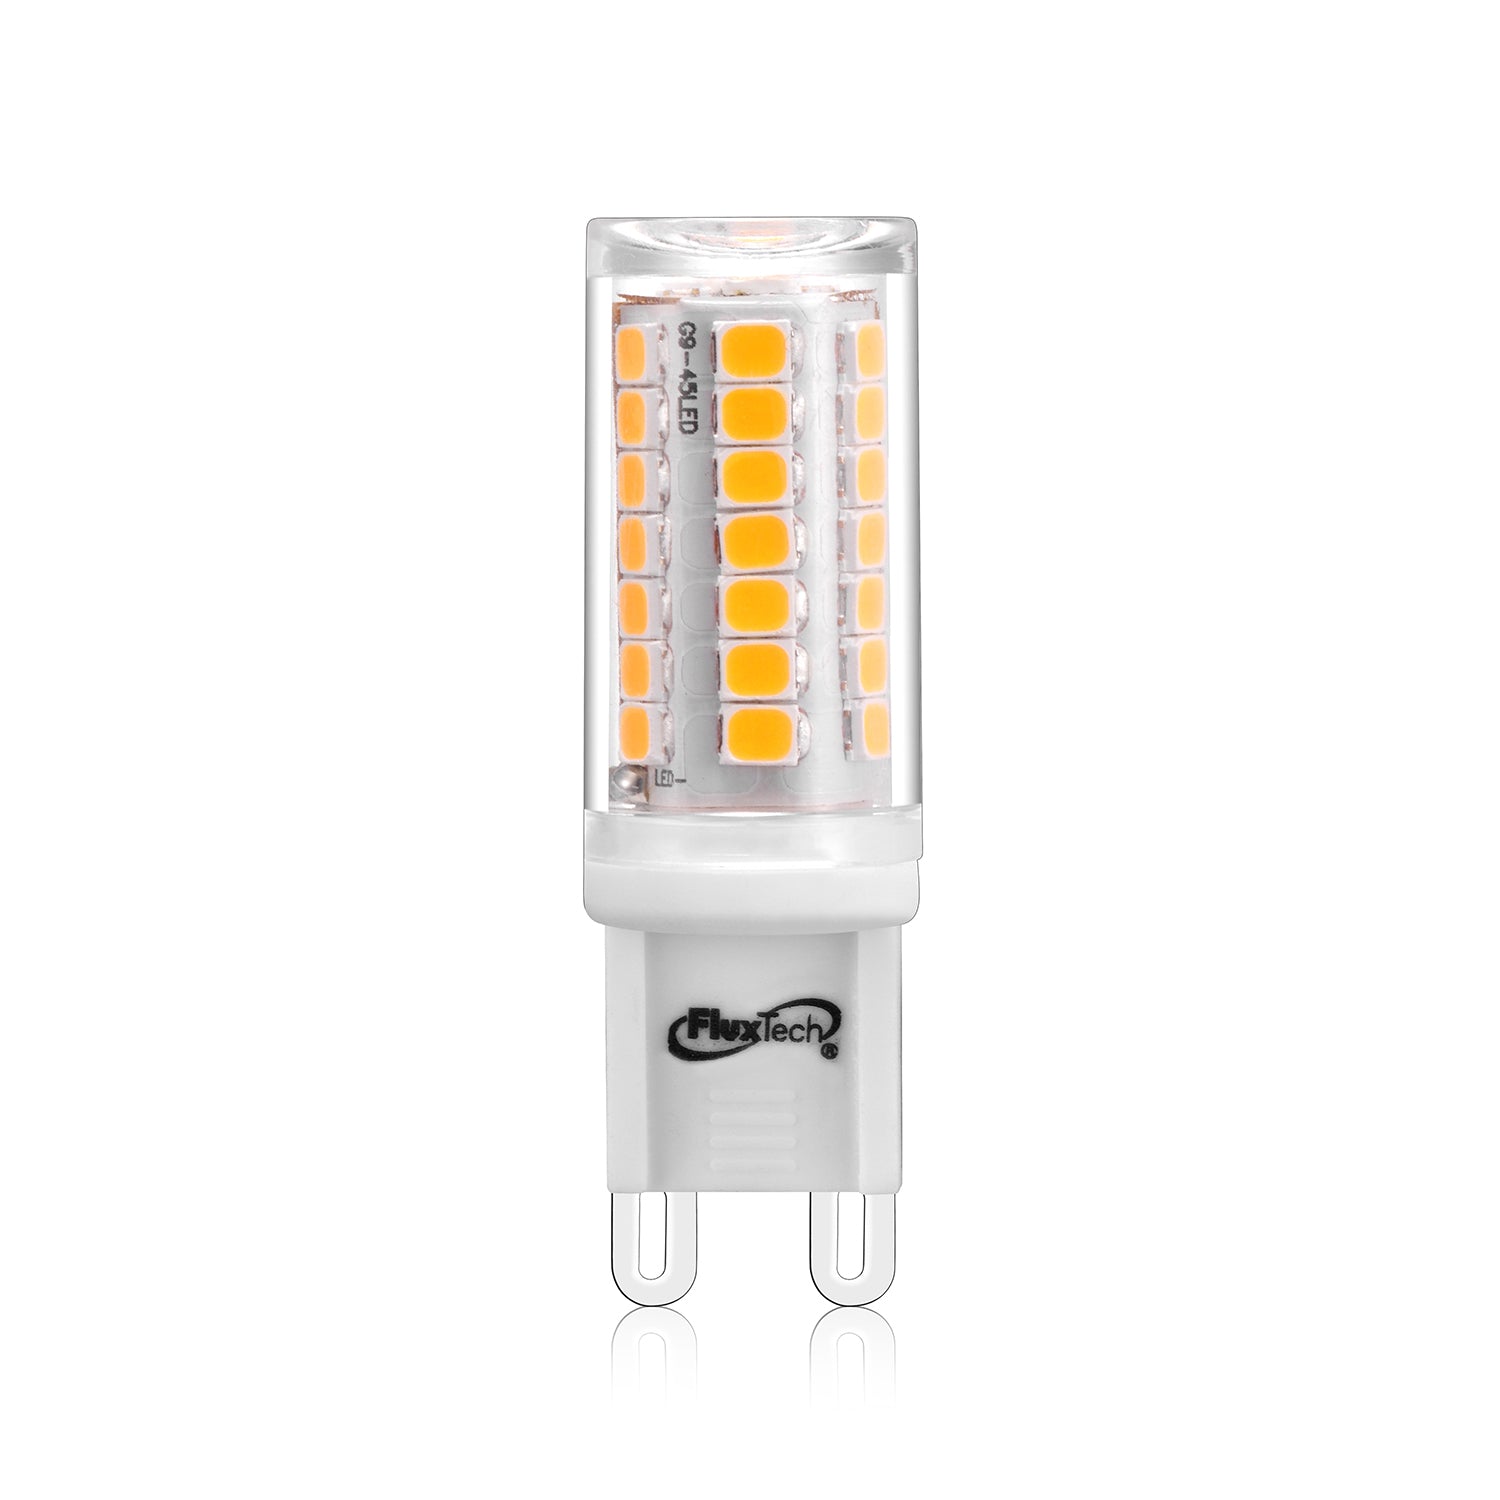 mode Observatie droom FluxTech - New Stepping Dimmable Technology G9 LED Bulb – FluxTech LED